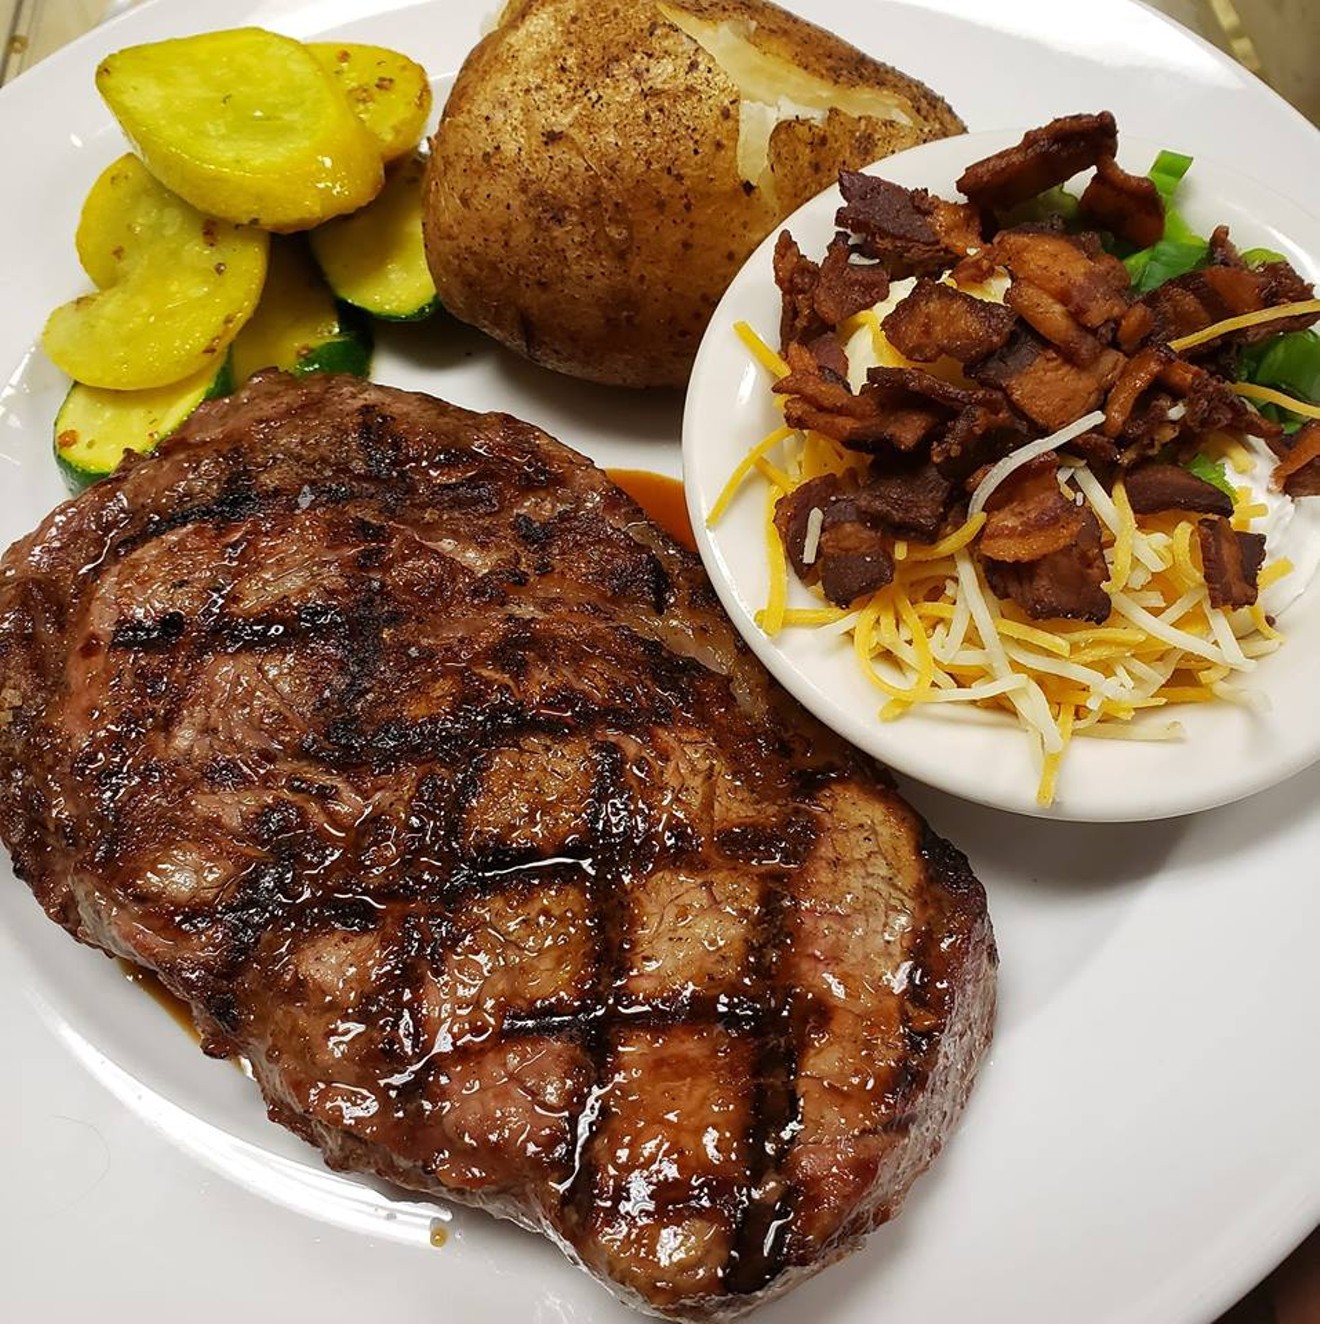 Prime beef is back on the menu at Luke's.